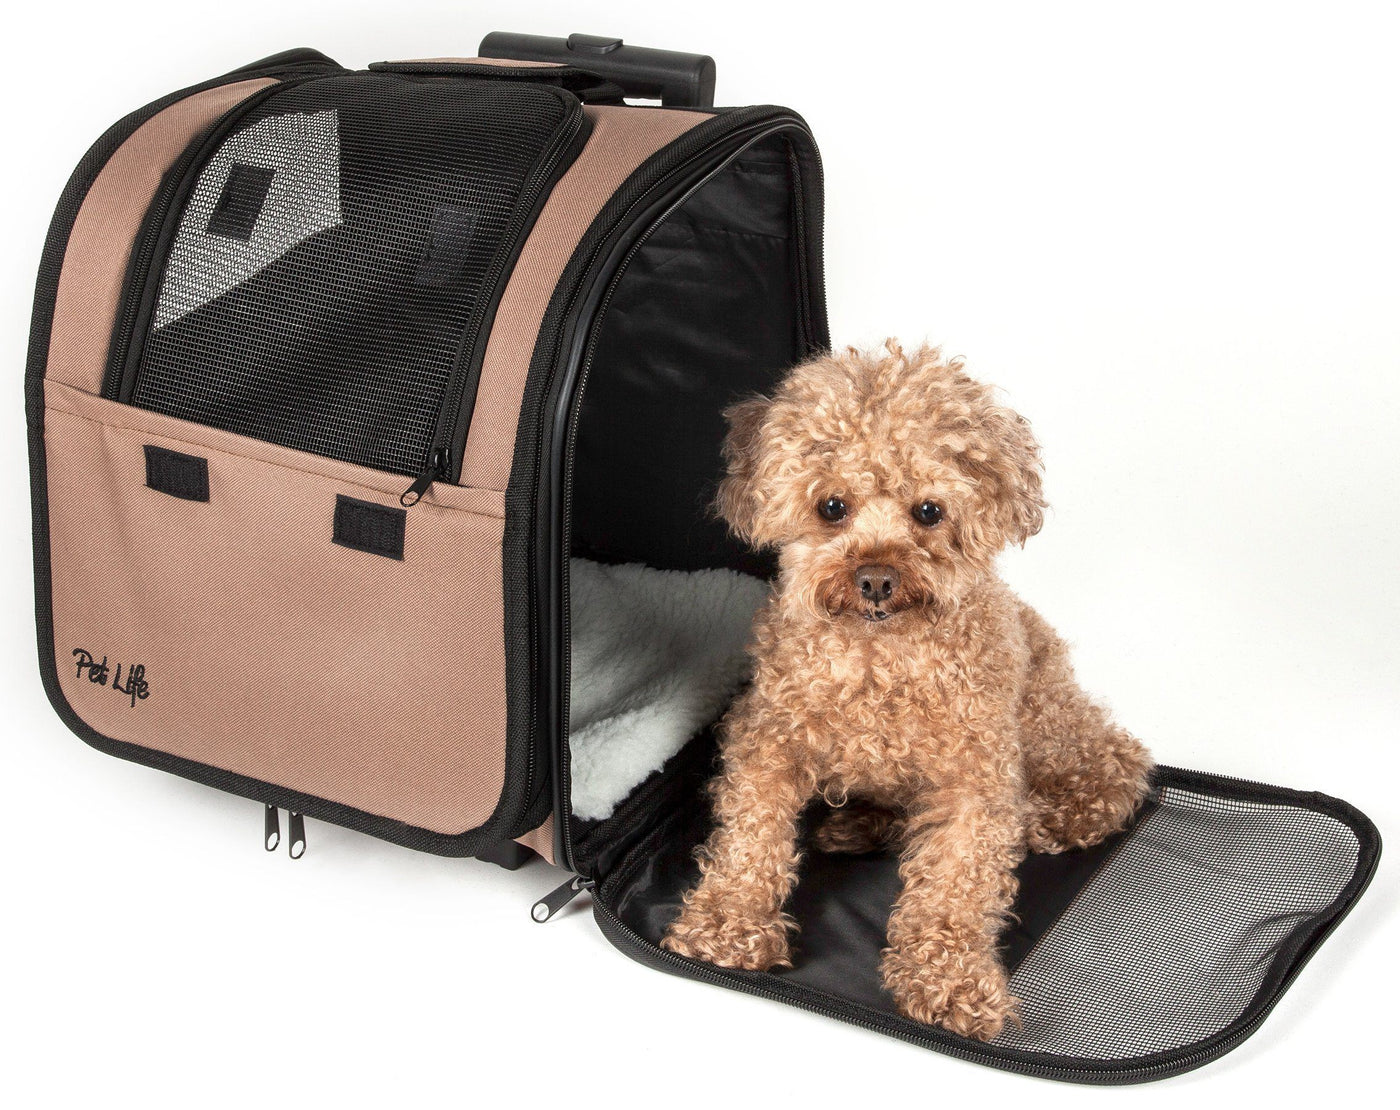 CS STORE Pet Carrier - Airline Approved Dog Carrier with Wheels